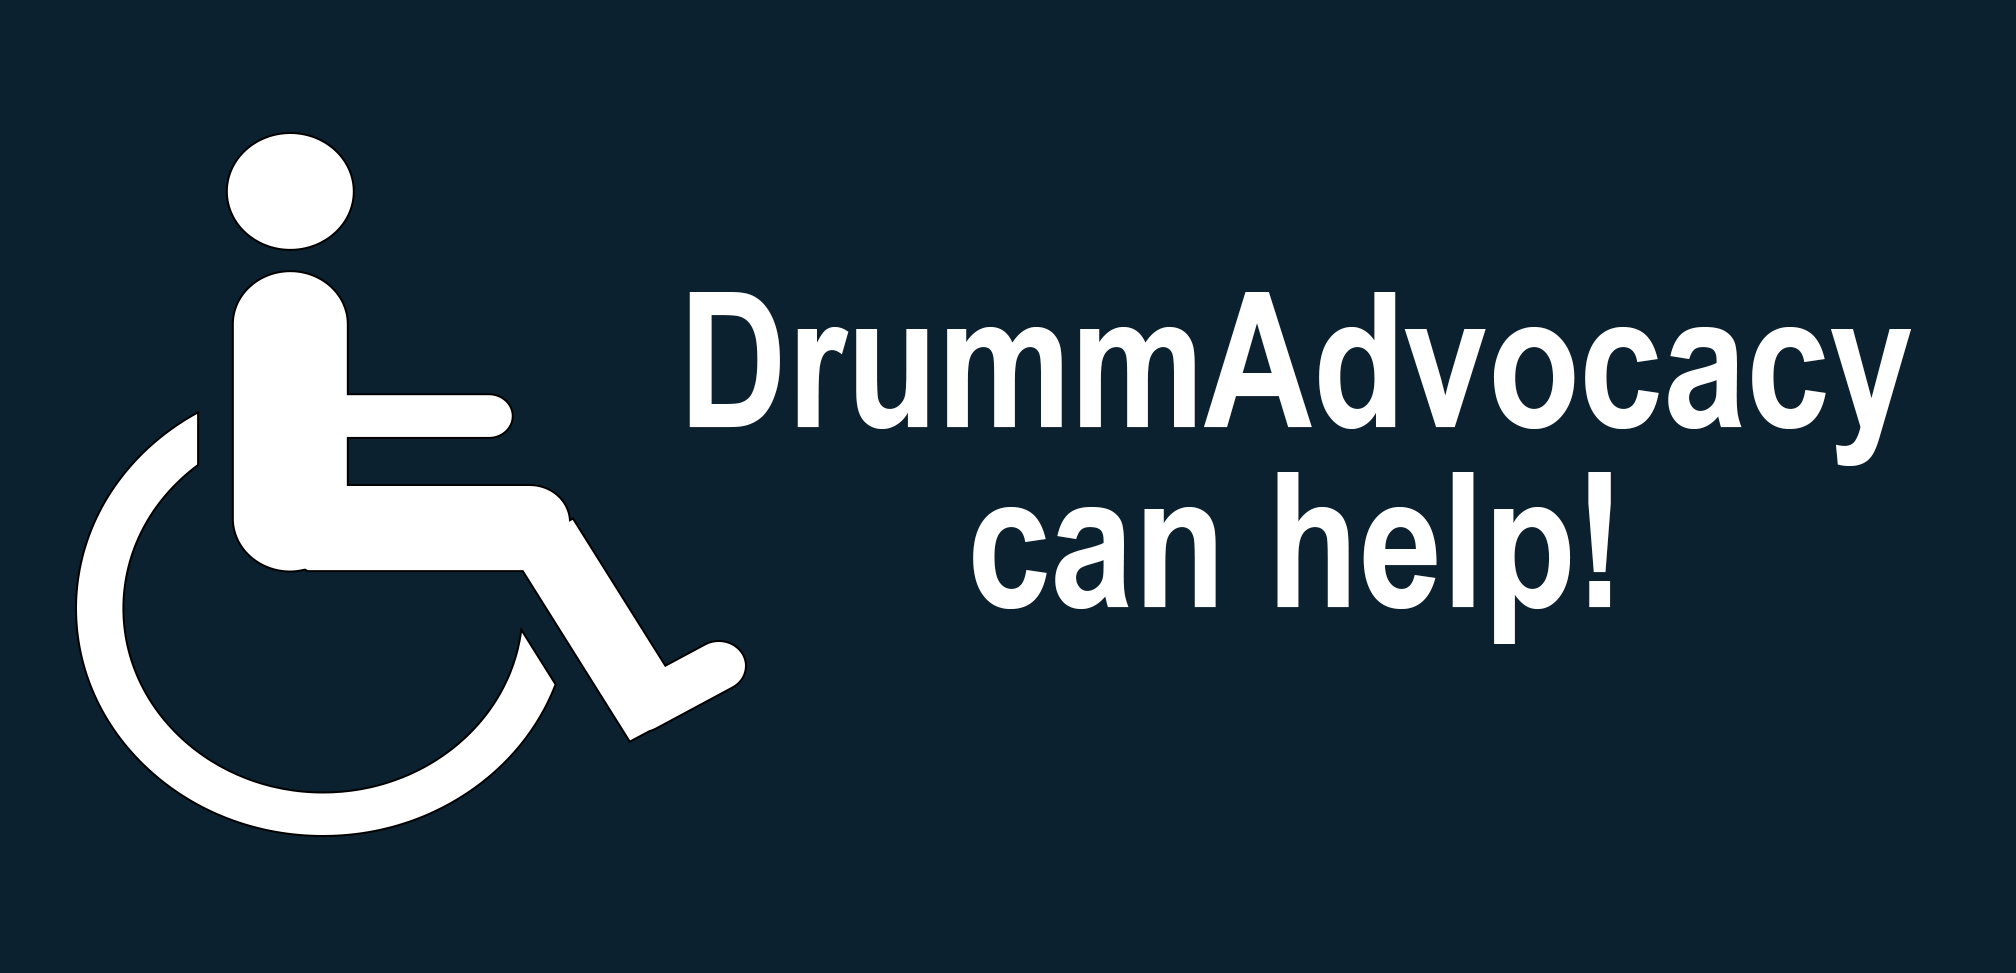 DrummAdvocacy can help.